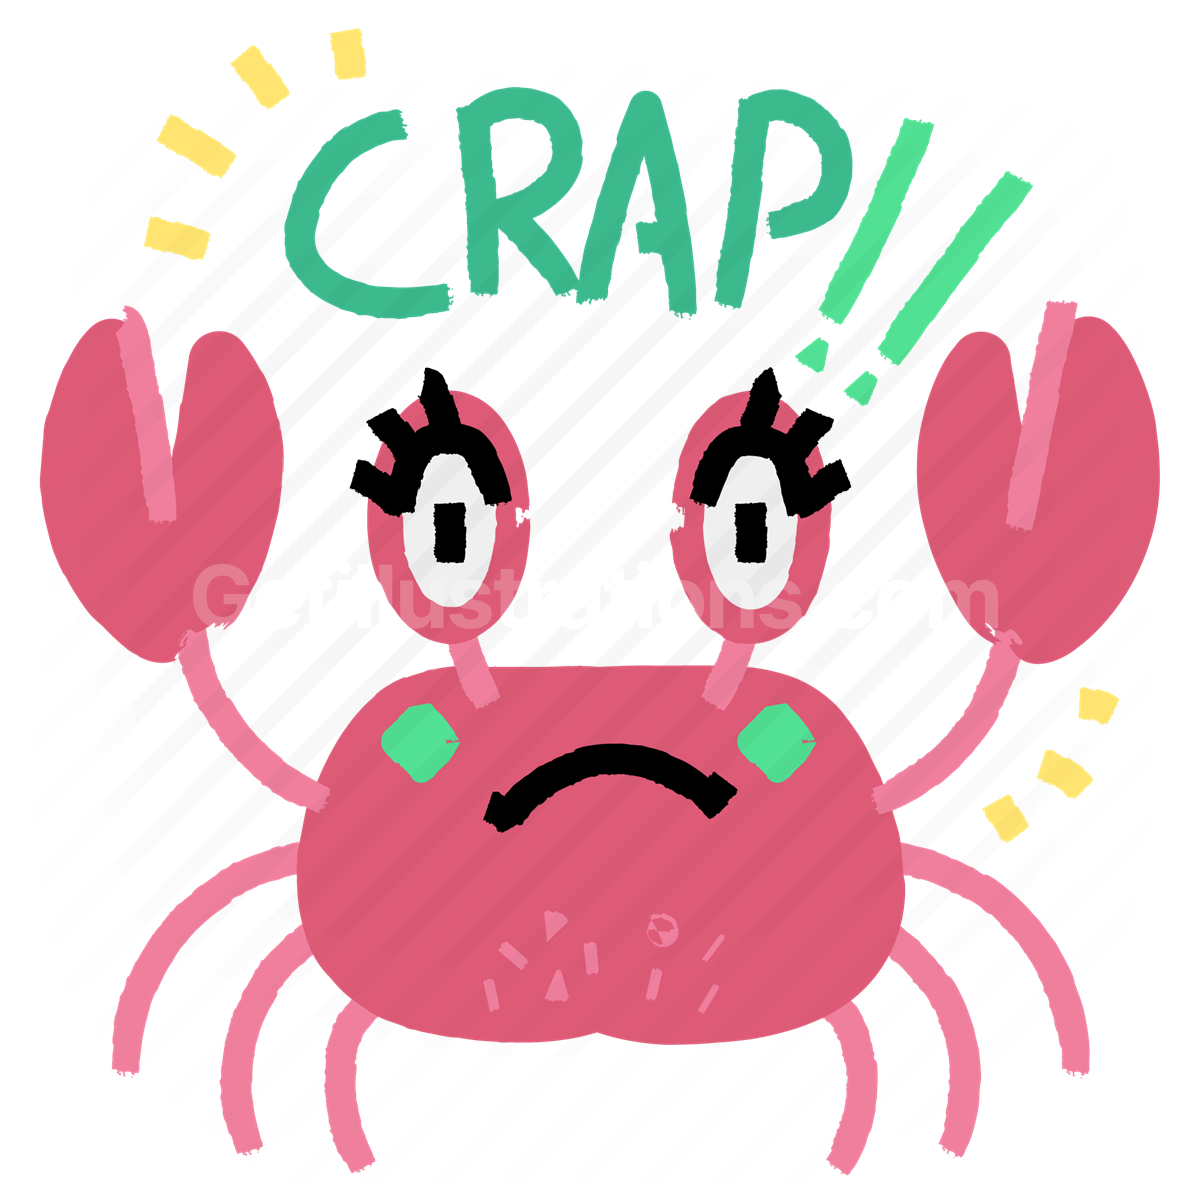 crap, crab, animal, sticker, character, face, smiley